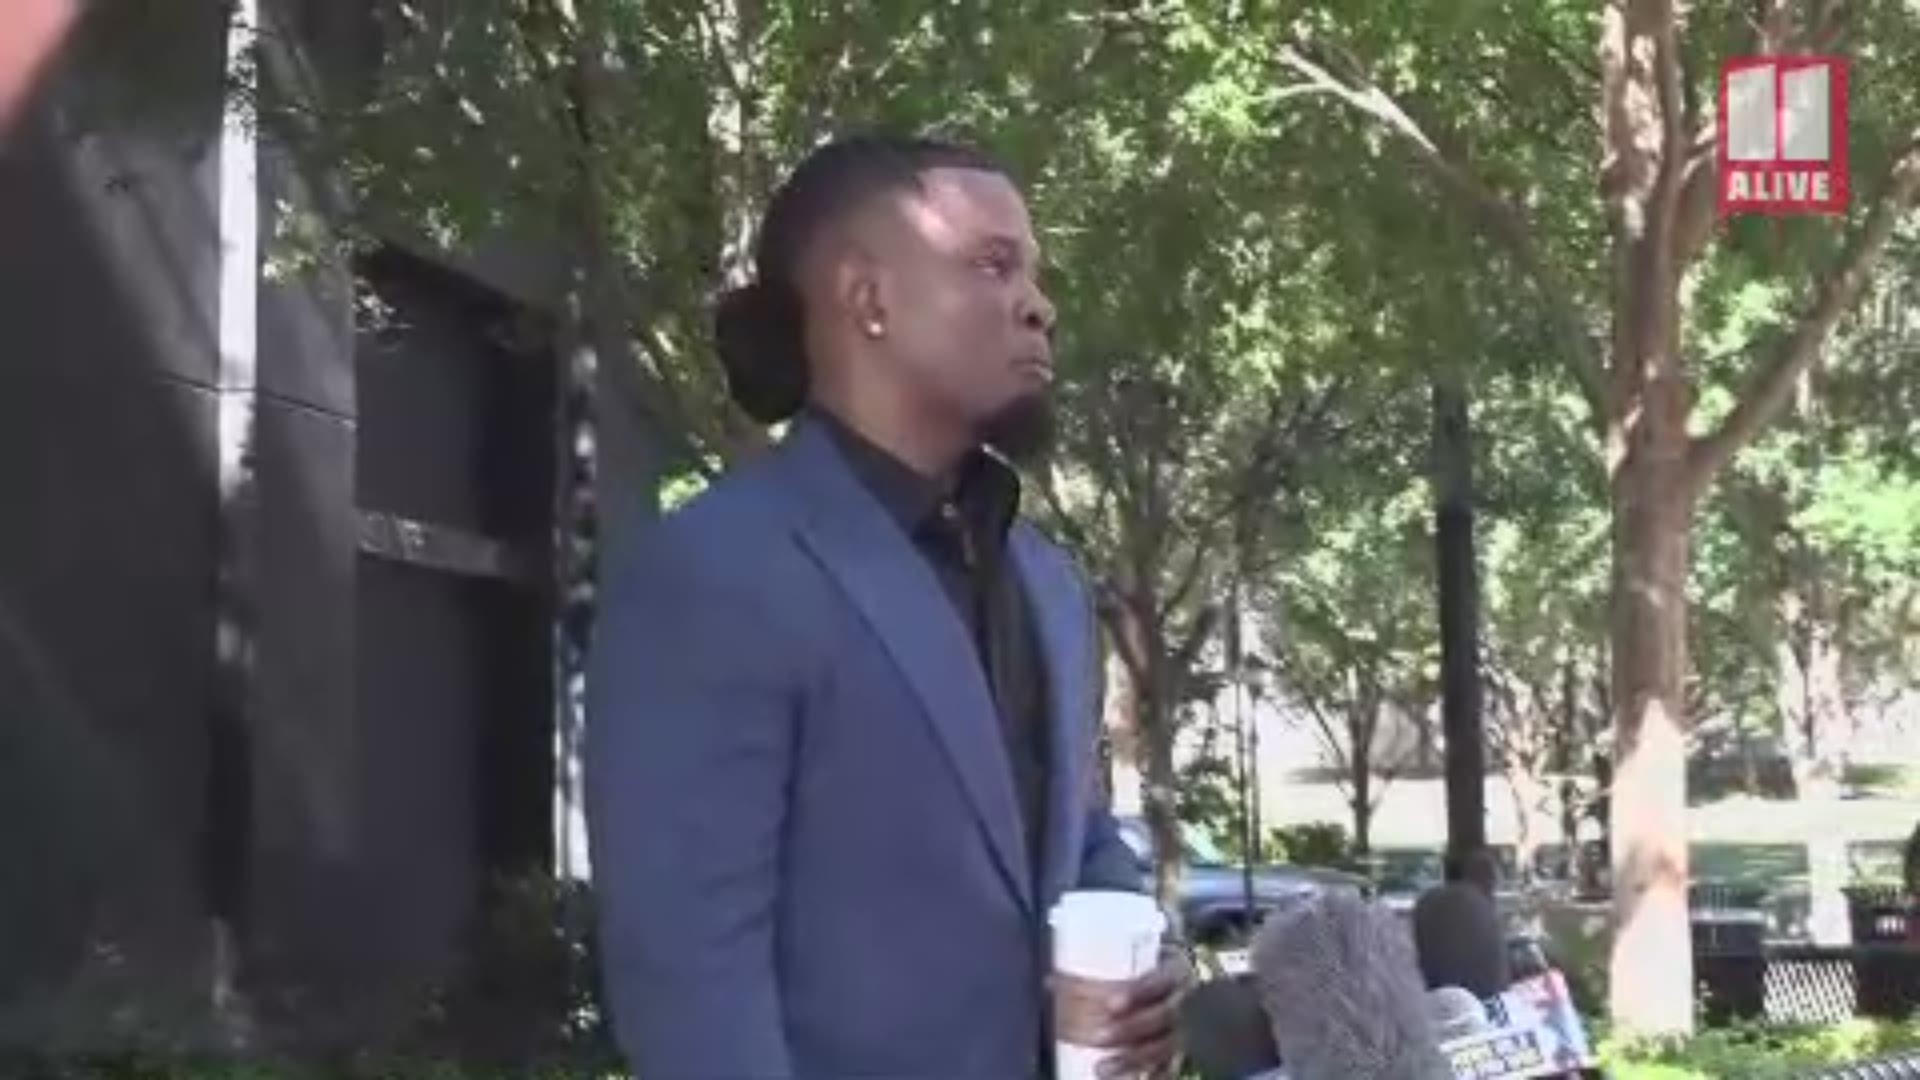 Darrell Johnson was giving a press conference on Friday in Atlanta in the wake of R. Kelly's arrest on federal charges when the family of Jocelyn Savage confronted him.